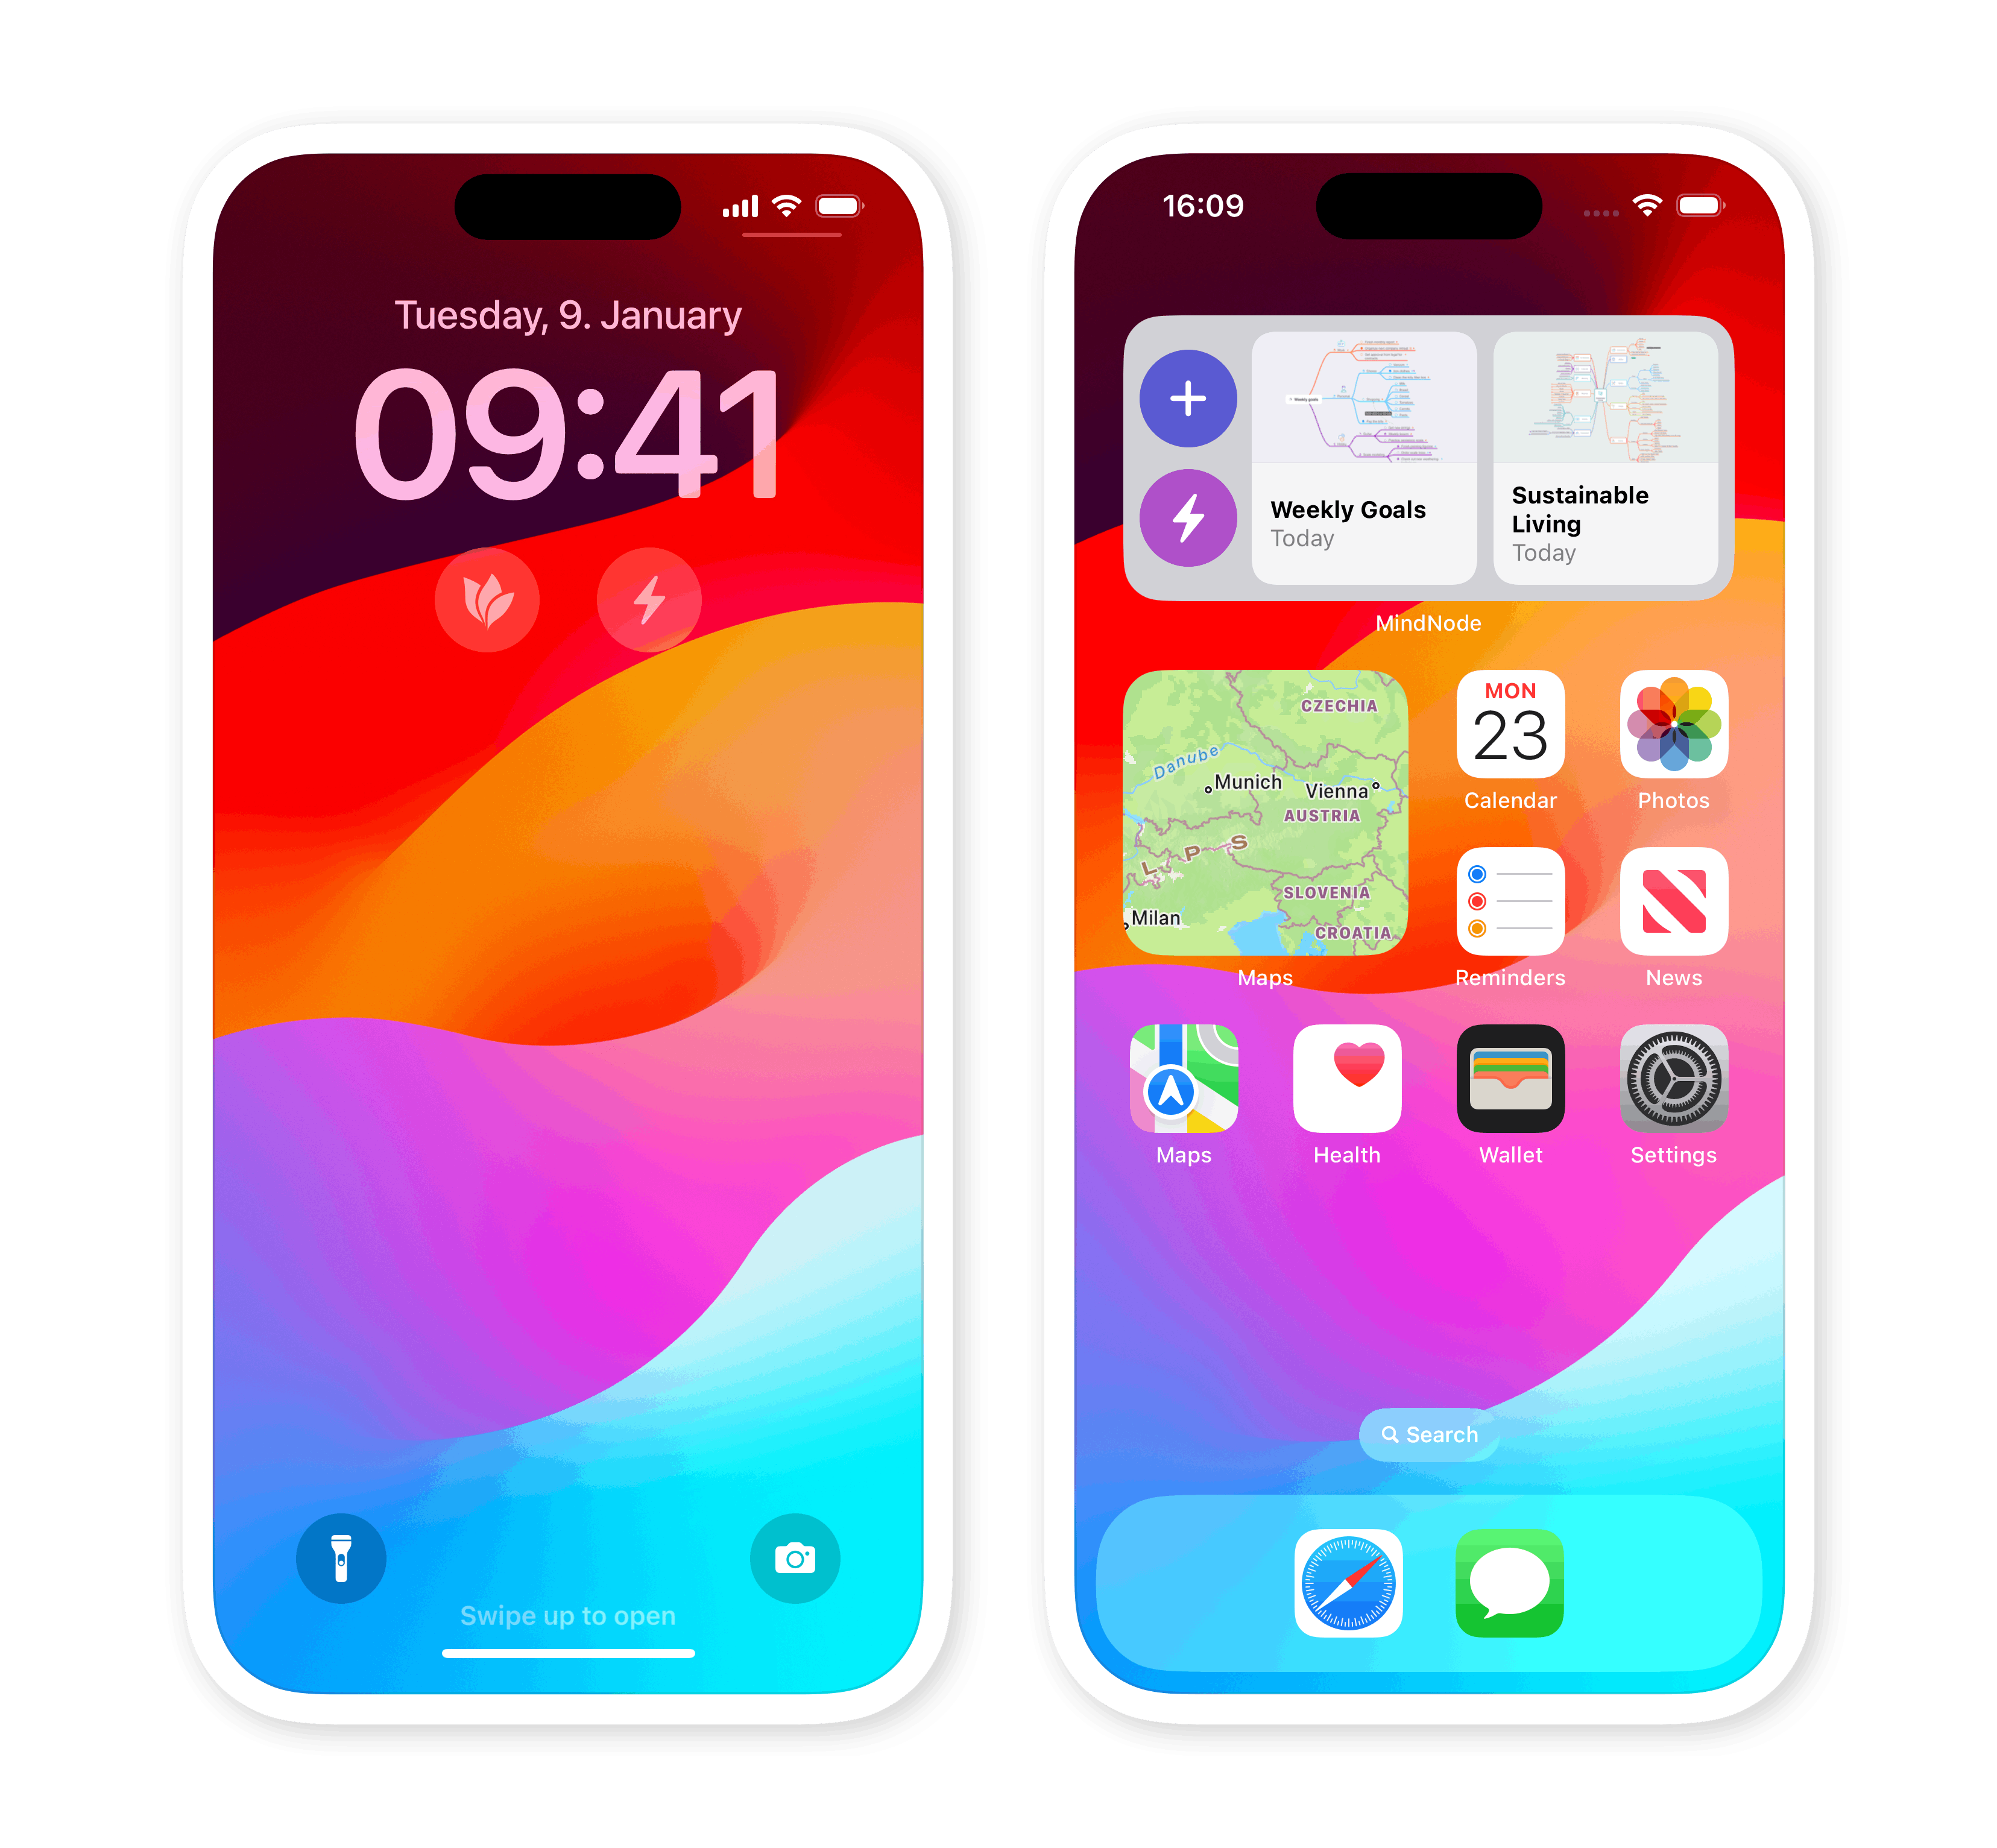 Side-by-side iPhones show the MindNode widgets displayed on both the lock screen and main app screen. The widget on the main app screen is a quick preview widget that stretches across the top third of the iPhone screen, providing options to create or edit a mind map.